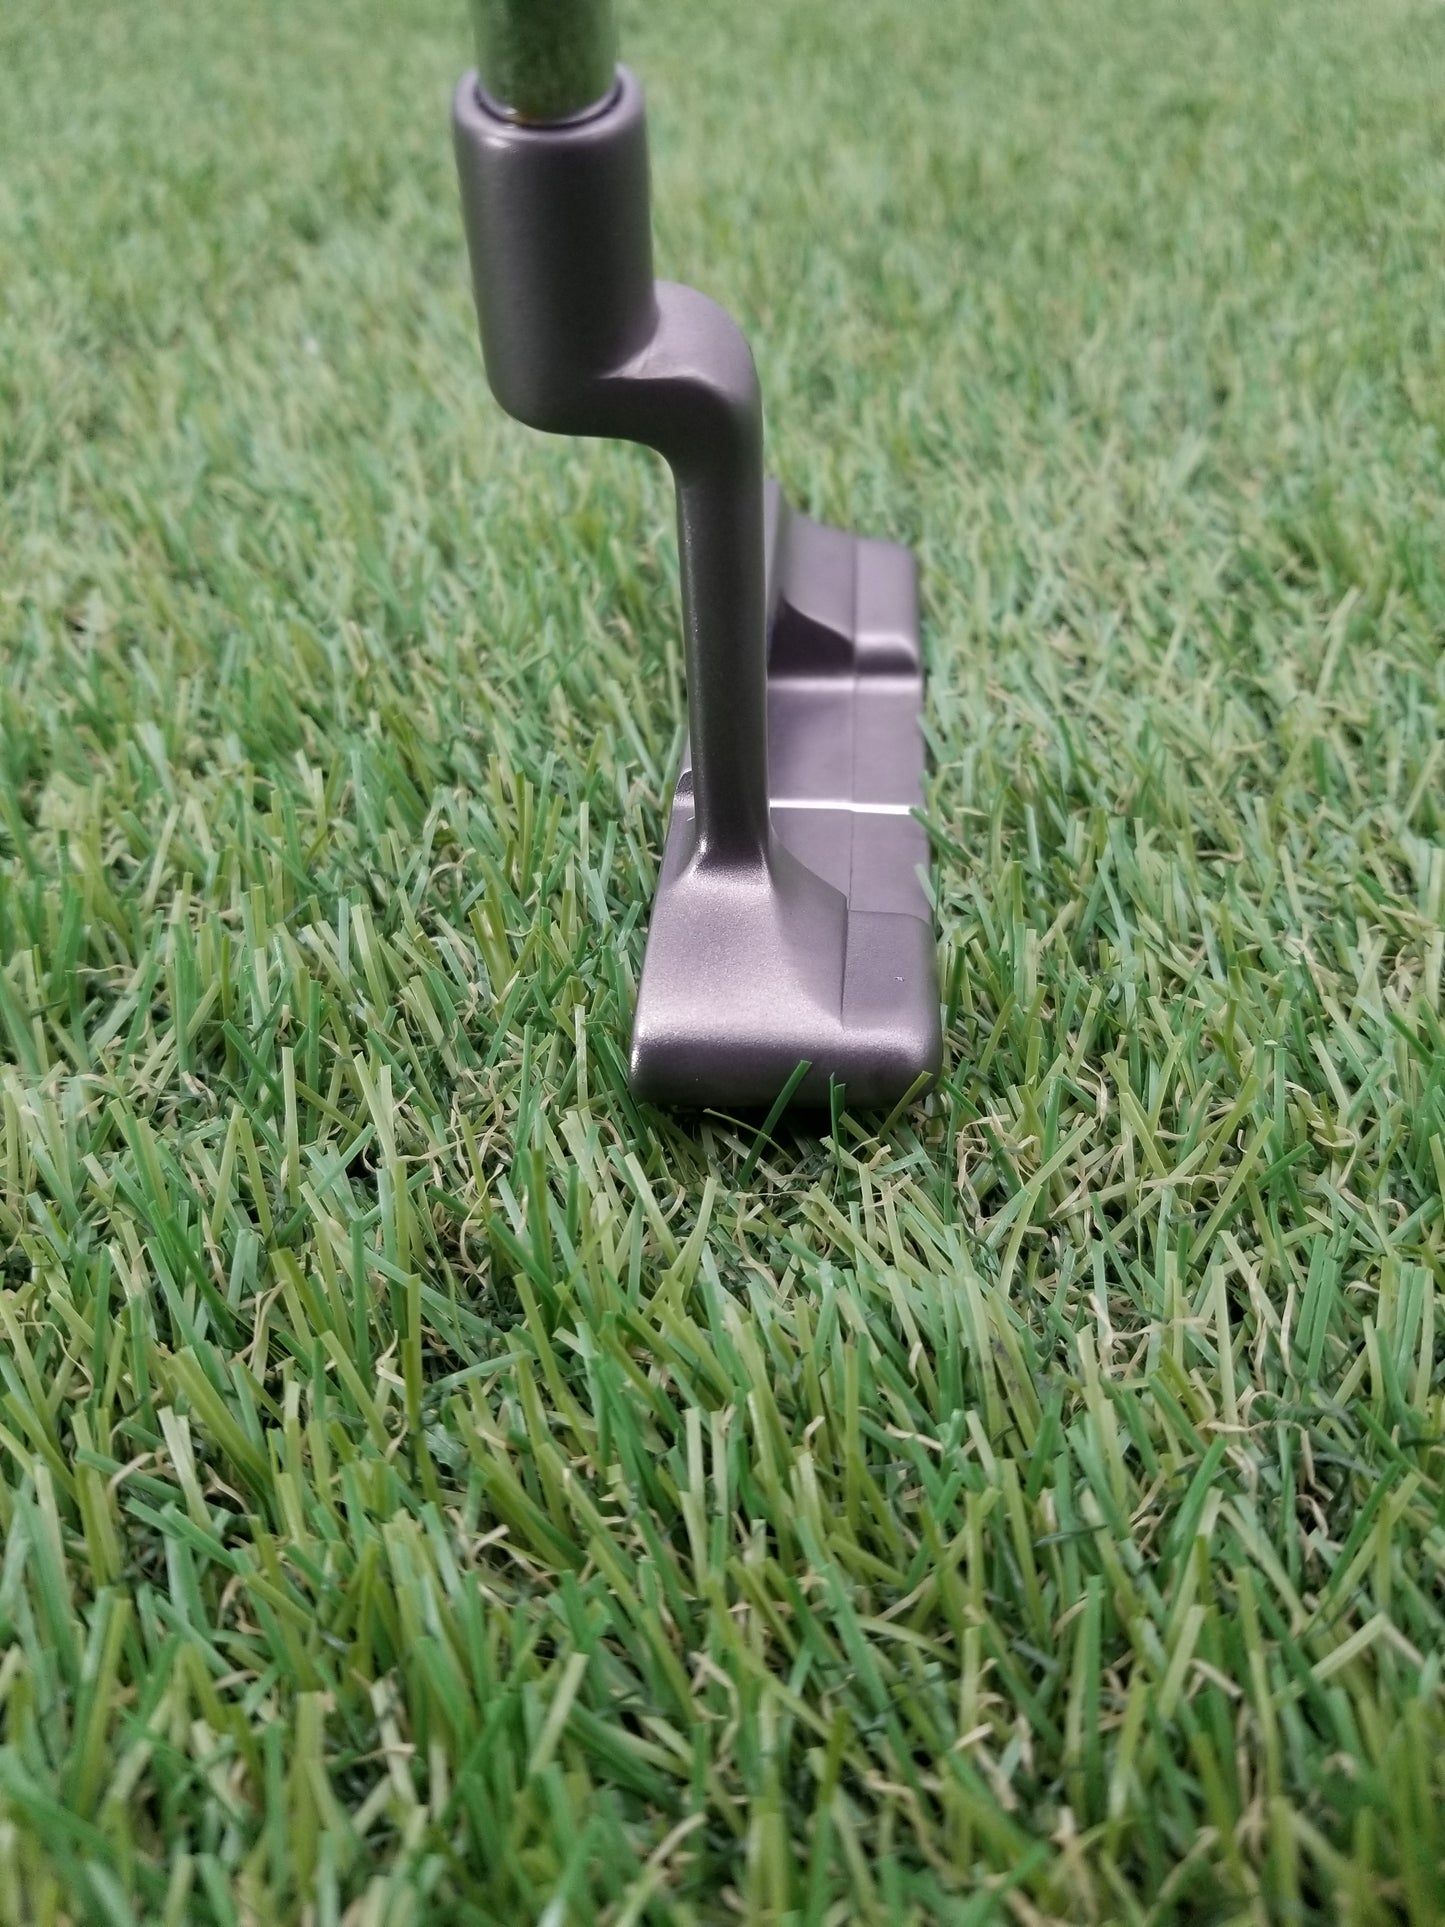 REFINISHED PING ANSER 2 PUTTER 34" DEMO